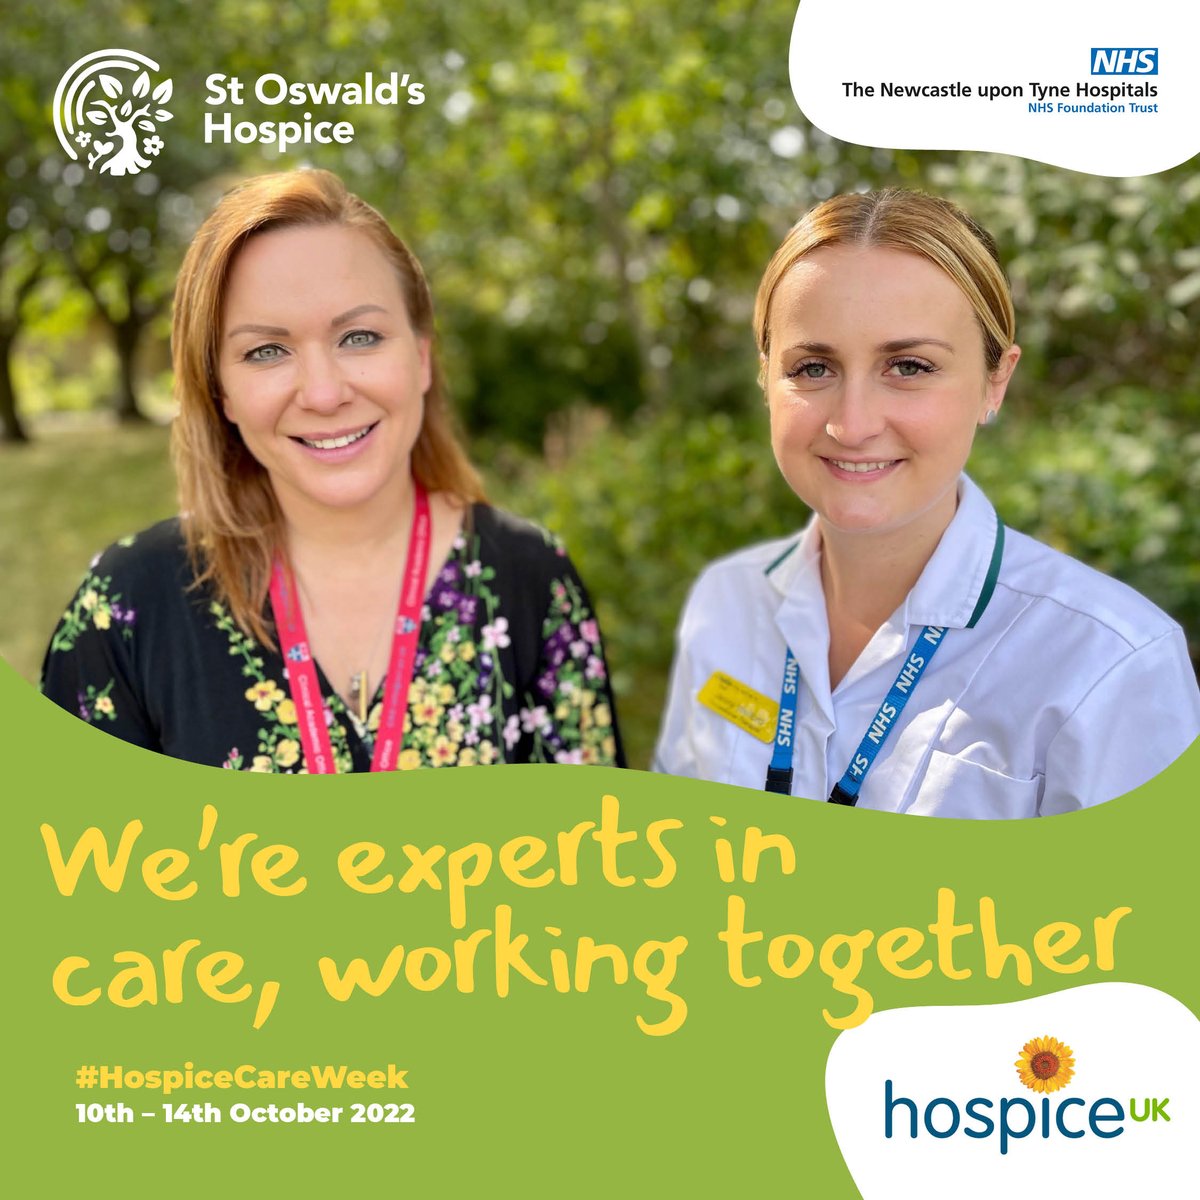 We’ve joined forces with @NewcastleHosps to offer patients living with lung cancer or mesothelioma personalised care, support and treatment when they need it most.

We’re here for you – whoever you are.

#StOswaldsHospice #QualityTimeForEveryone #HospiceCareWeek @hospiceuk